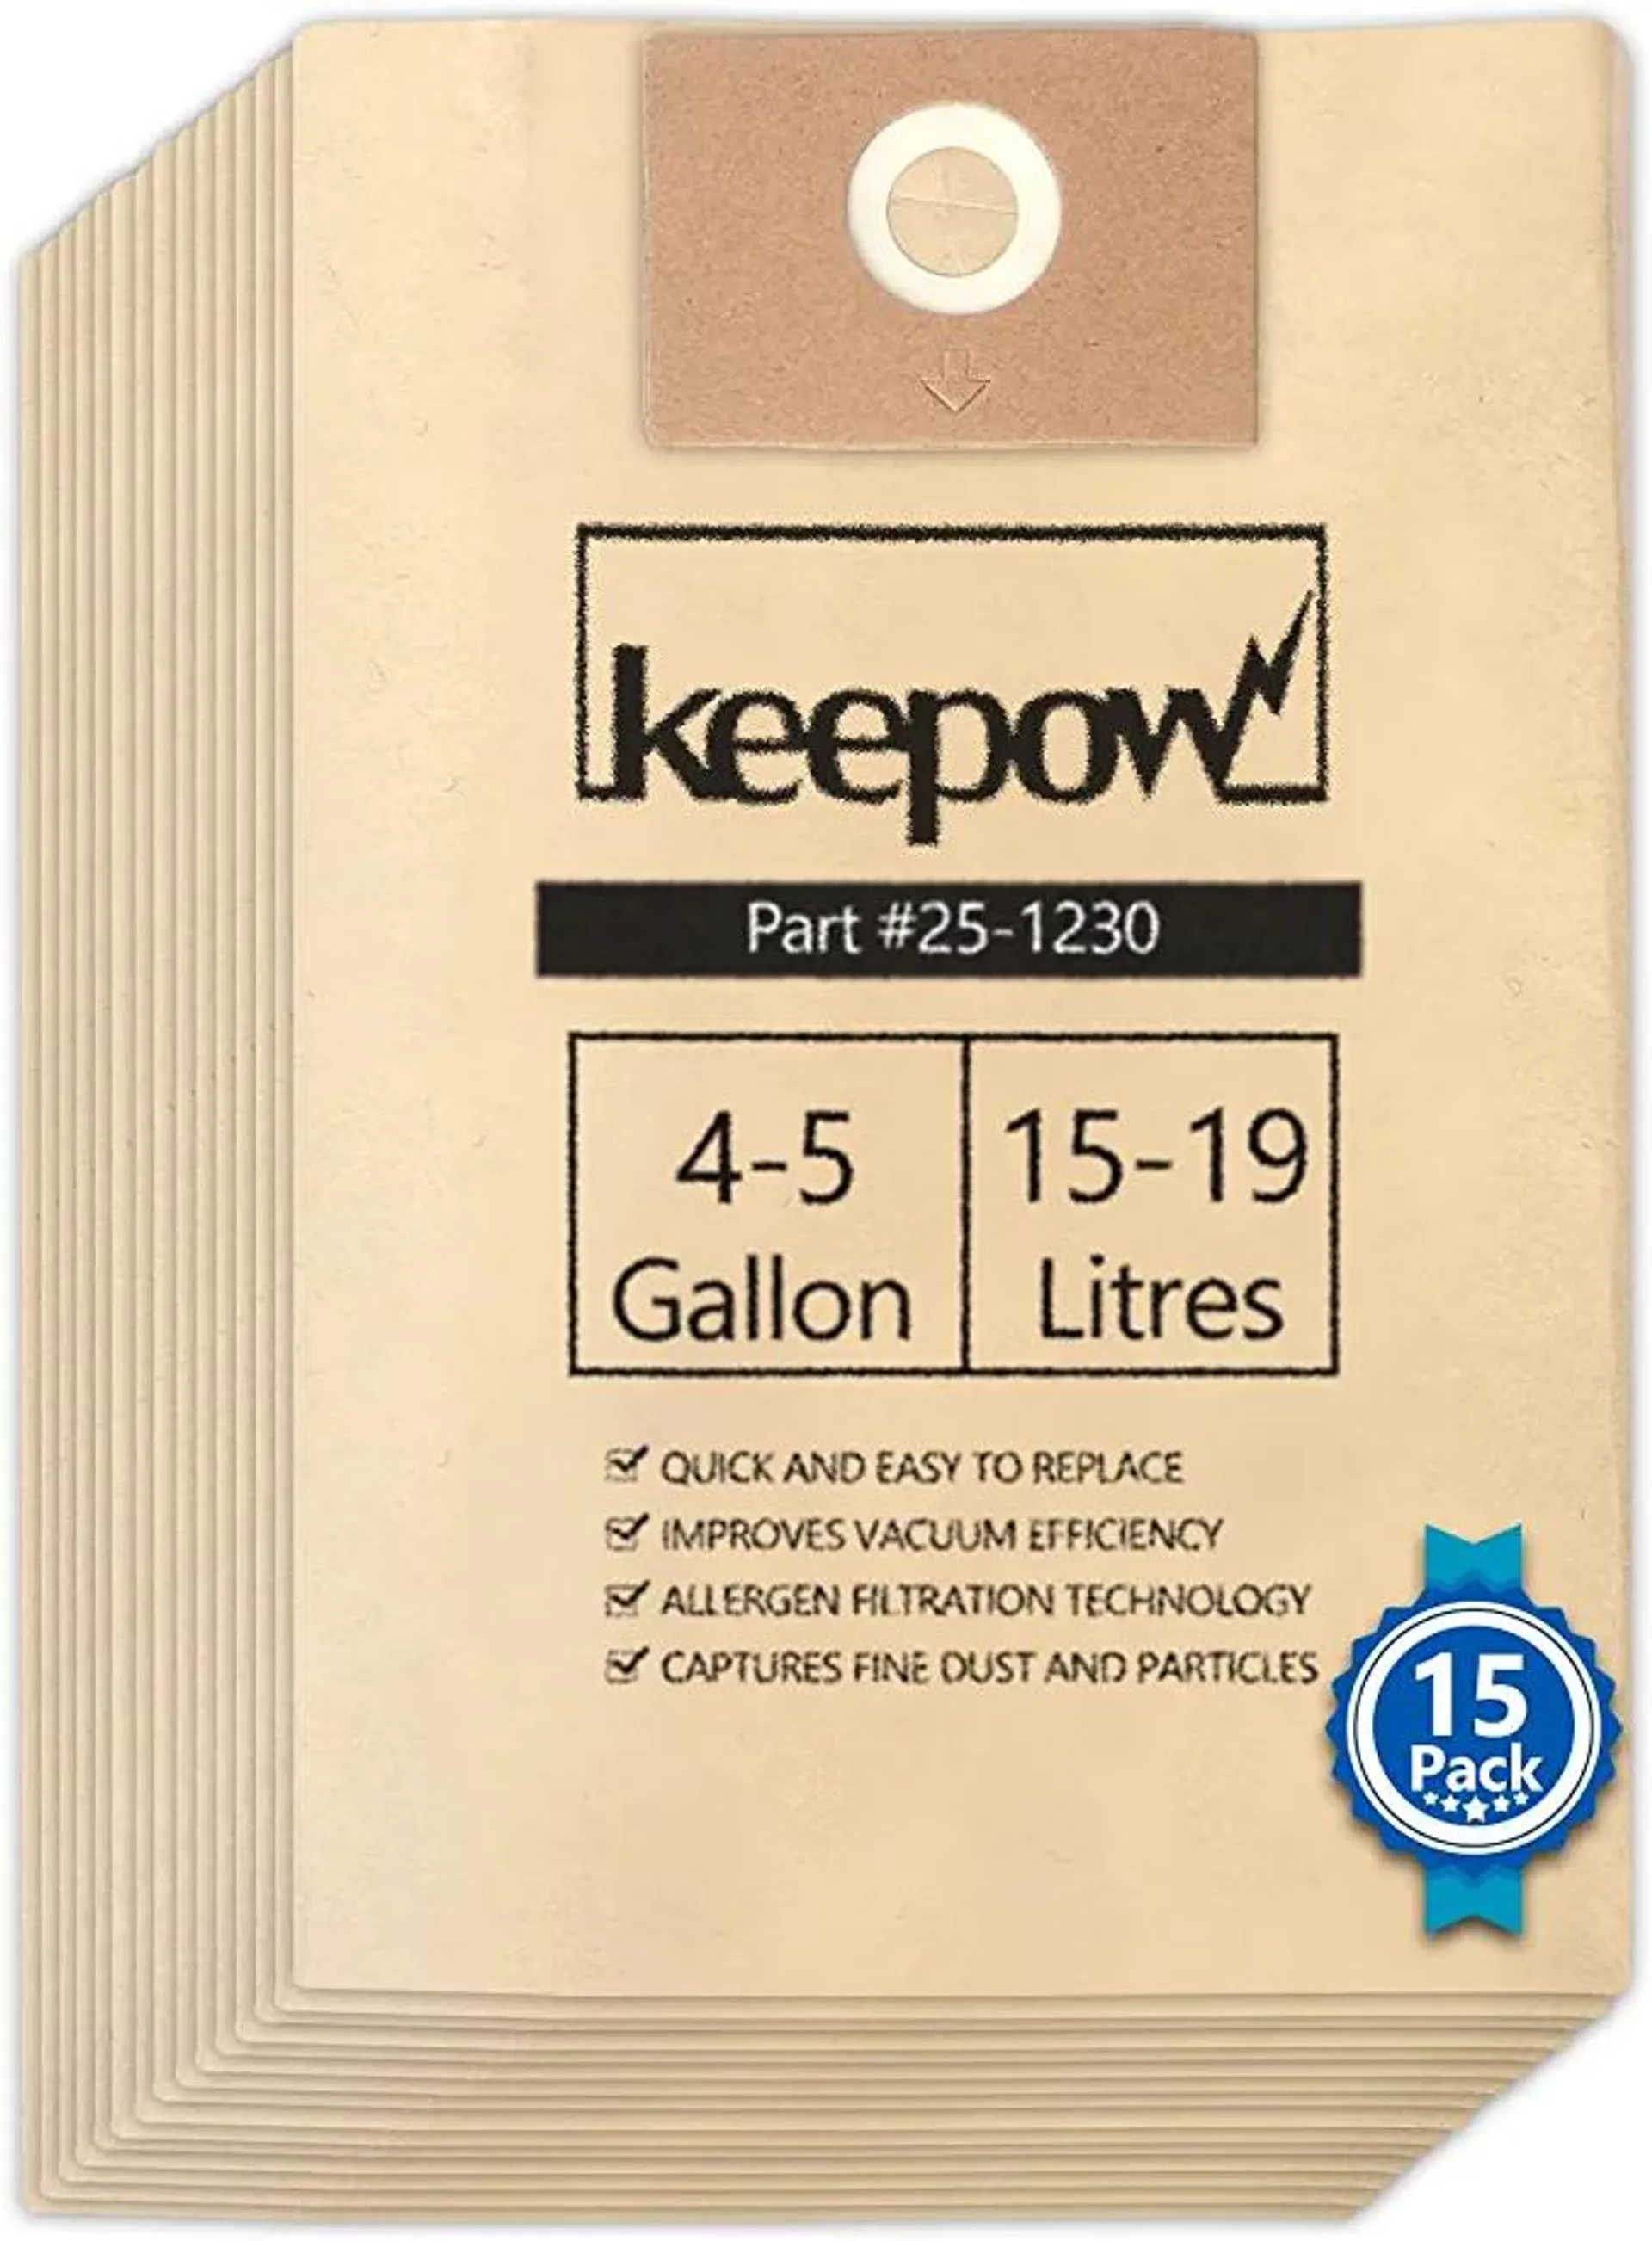 KEEPOW 25-1230 Filter Bags Compatible with Stanley 4 to 5 Gallon Vacuums SL18129, SL18130, SL18130P 15 Pack